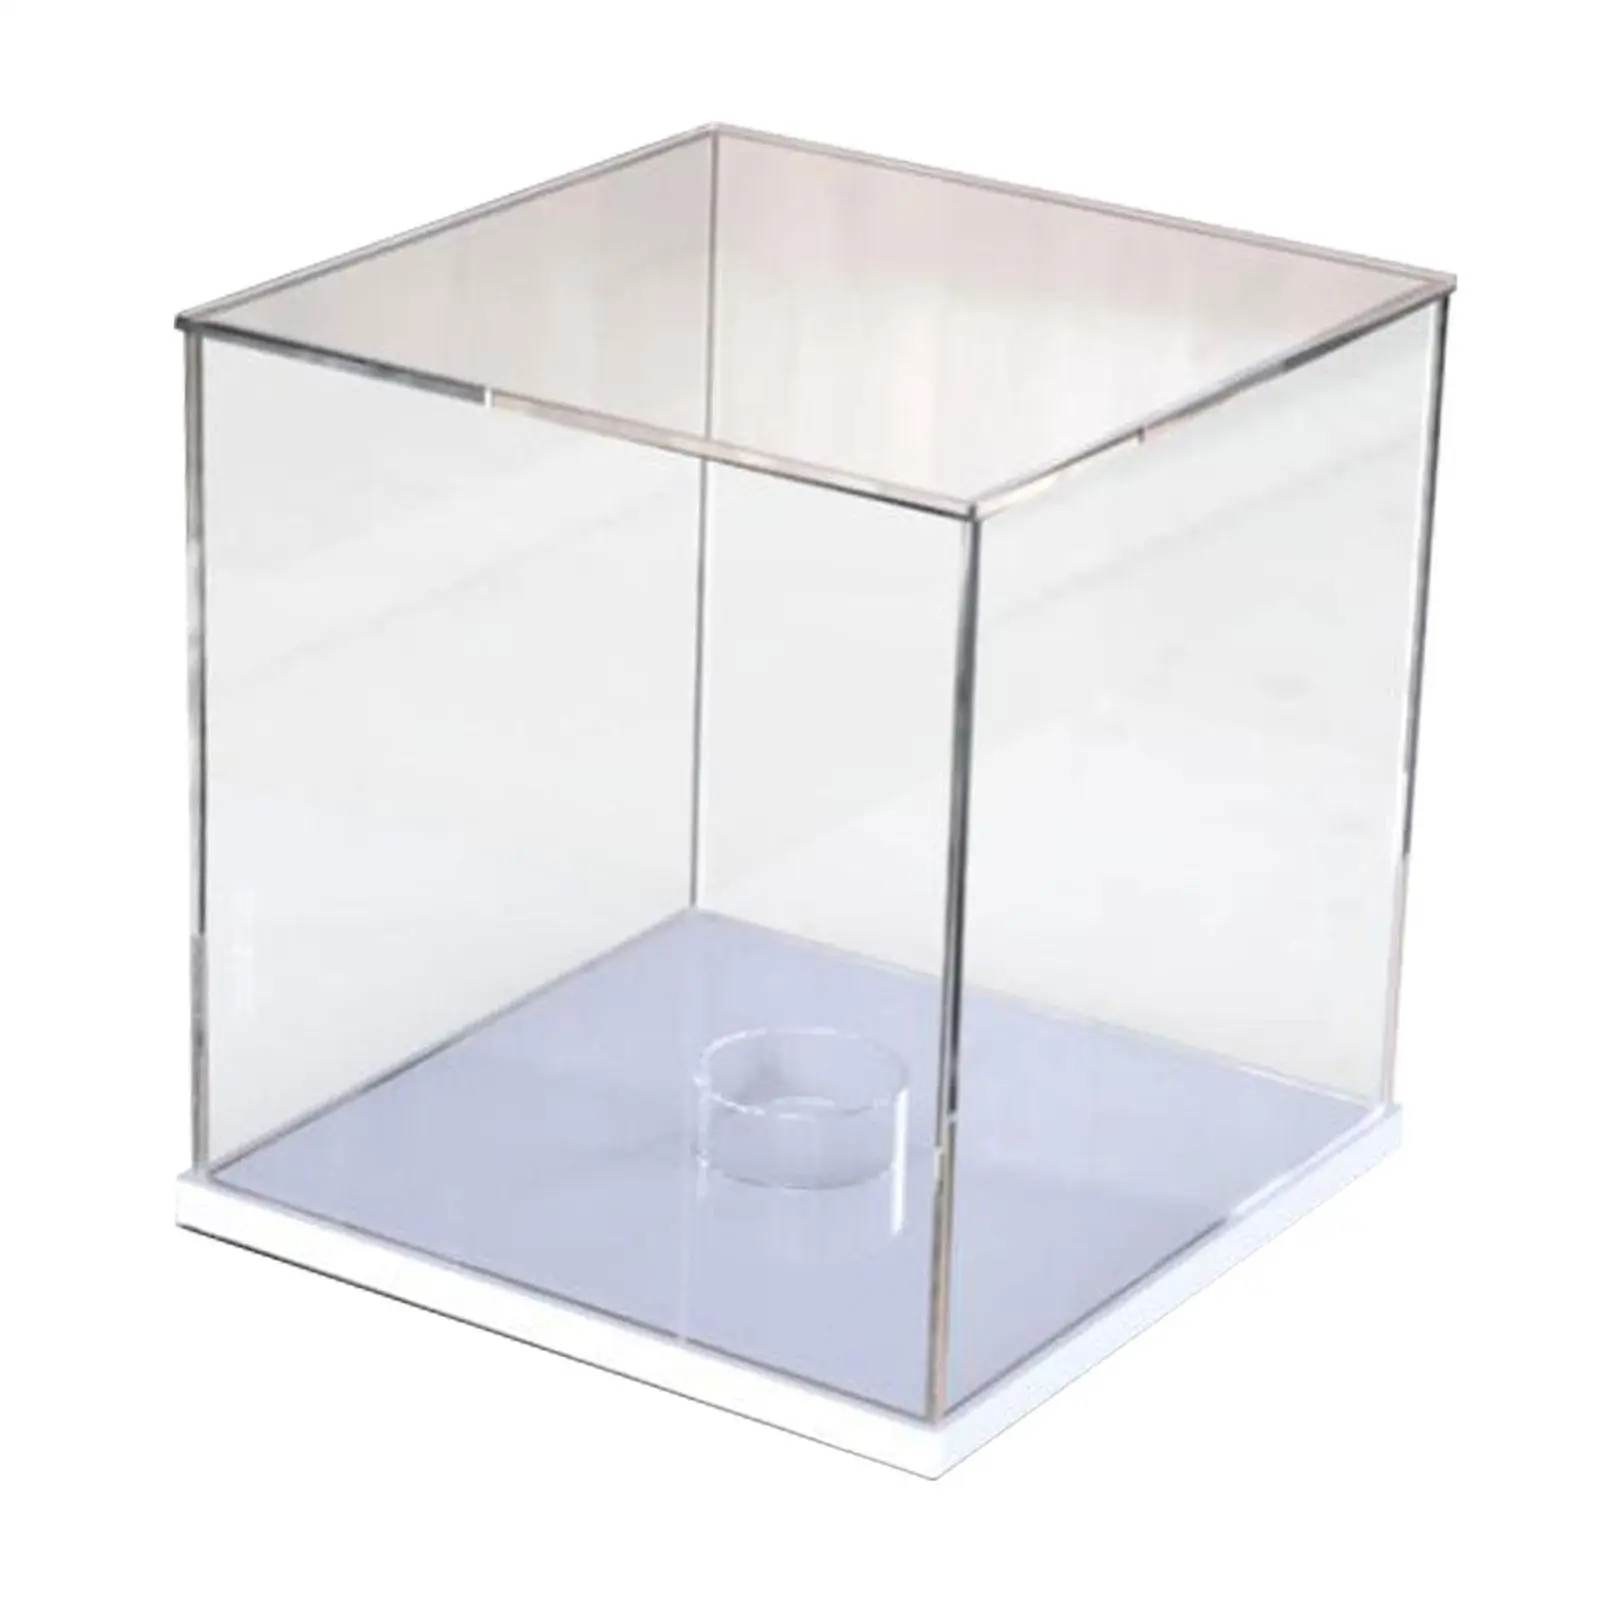 Basketball Display Case with Stand Clear Acrylic Full Size Basketball Display Box for Toys Volleyball Statues Collectibles